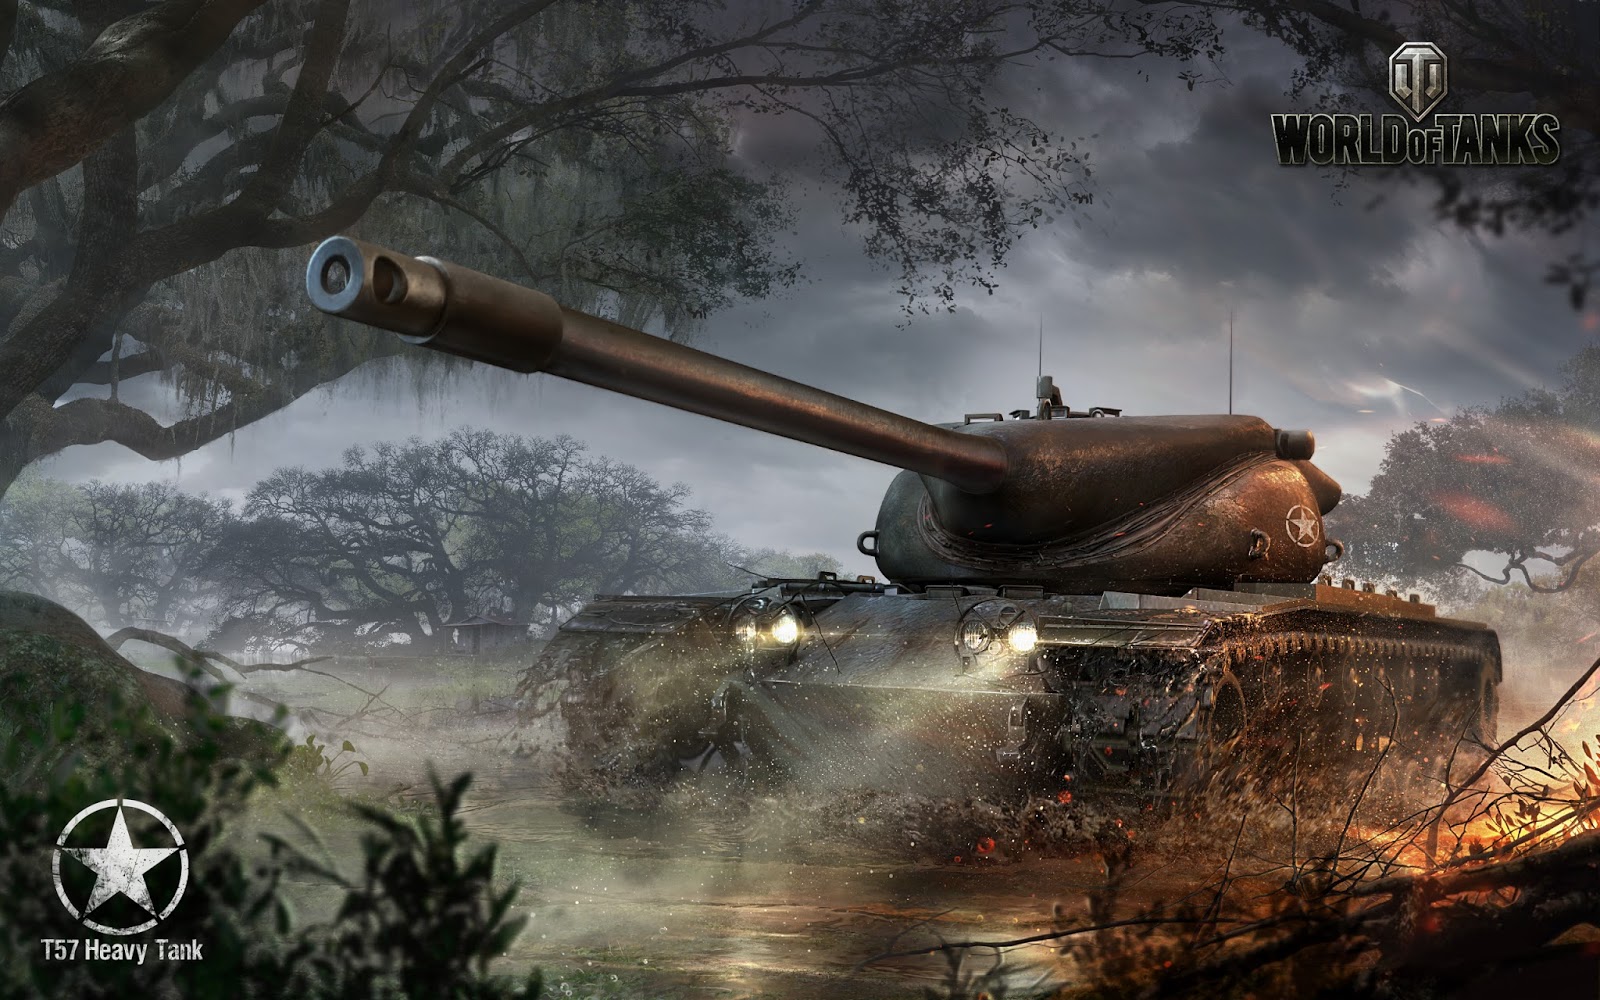 world of tanks wallpaper hd,pc game,strategy video game,combat vehicle,action adventure game,tank